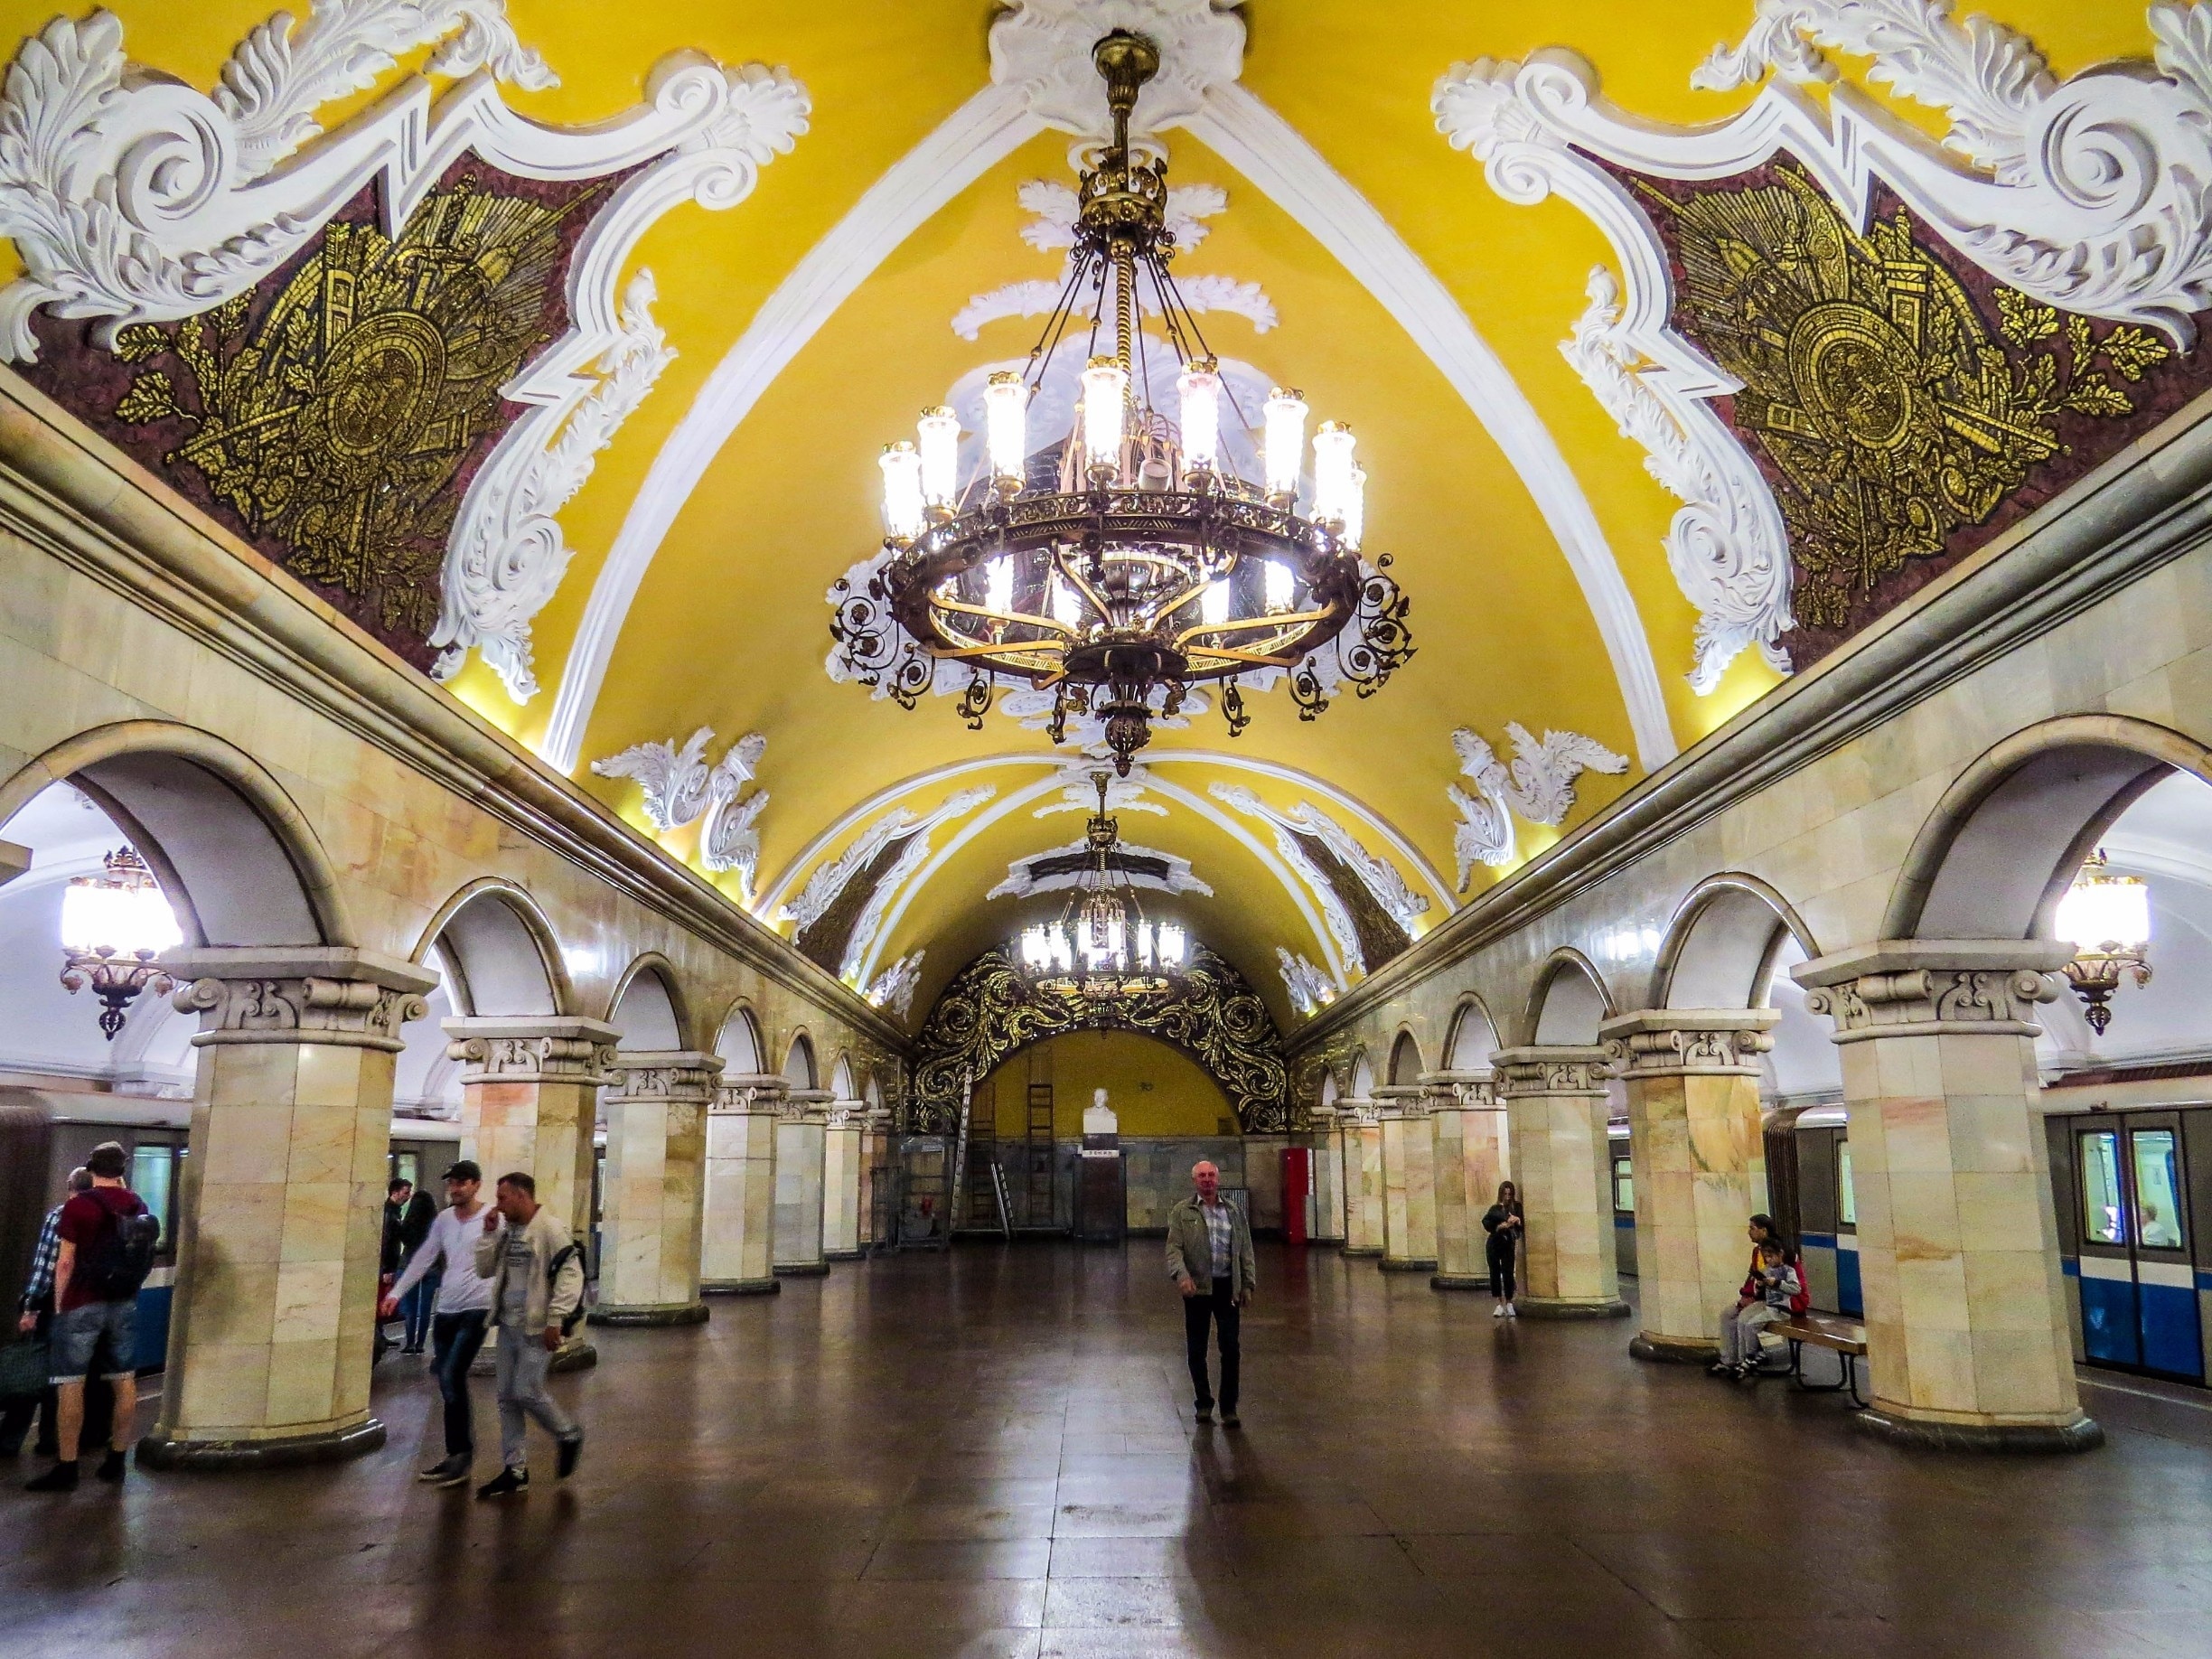 Komsomolskaya metro station in Line 5, Moscow, Russia. There are many beautiful metro stations like this one in Moscow and they have become a tourist attraction.